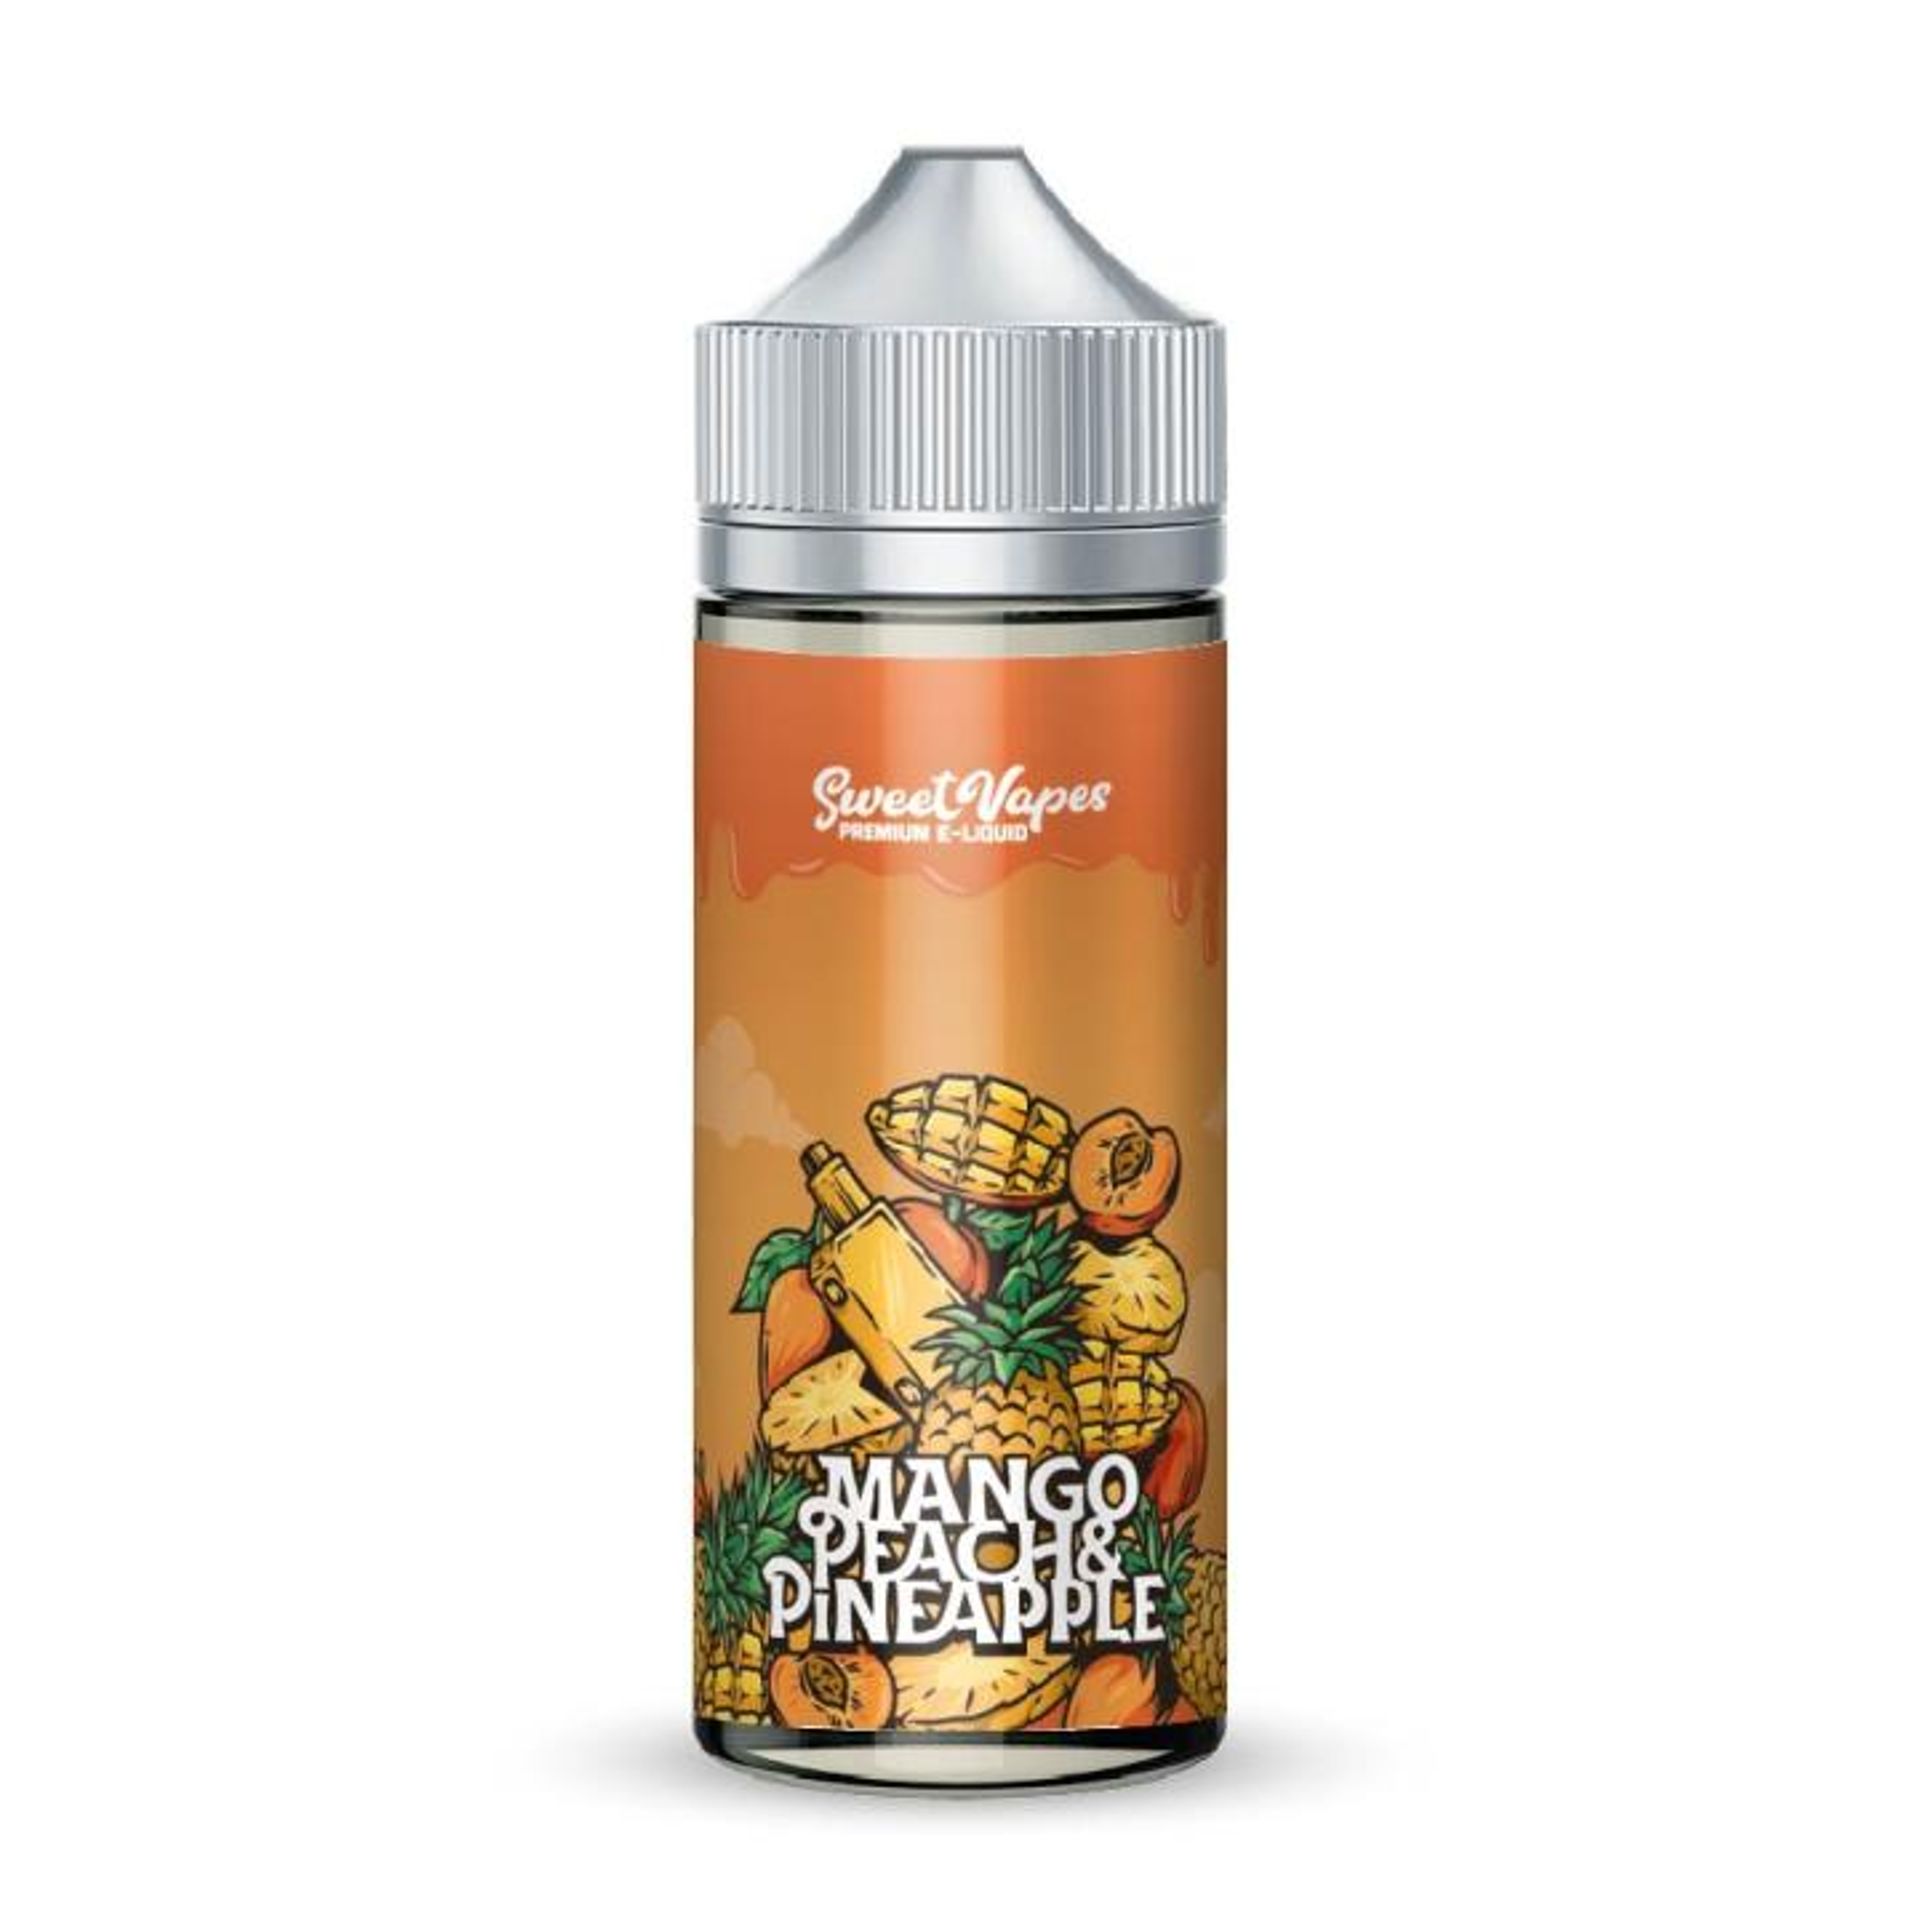 Image of Mango, Peach & Pineapple by Sweet Vapes